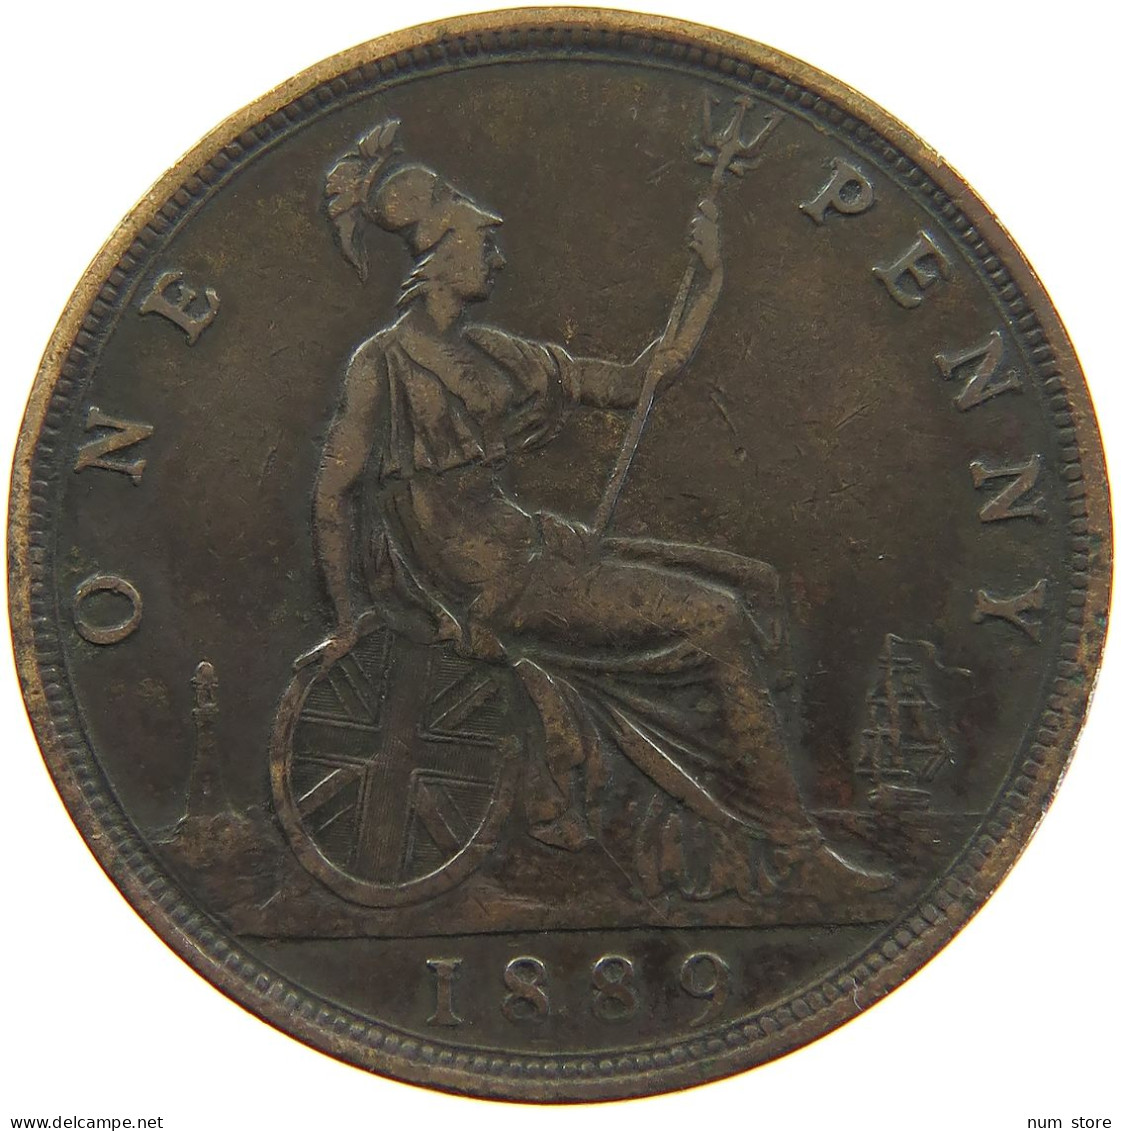 GREAT BRITAIN PENNY 1889 Victoria 1837-1901 #a050 0599 - D. 1 Penny